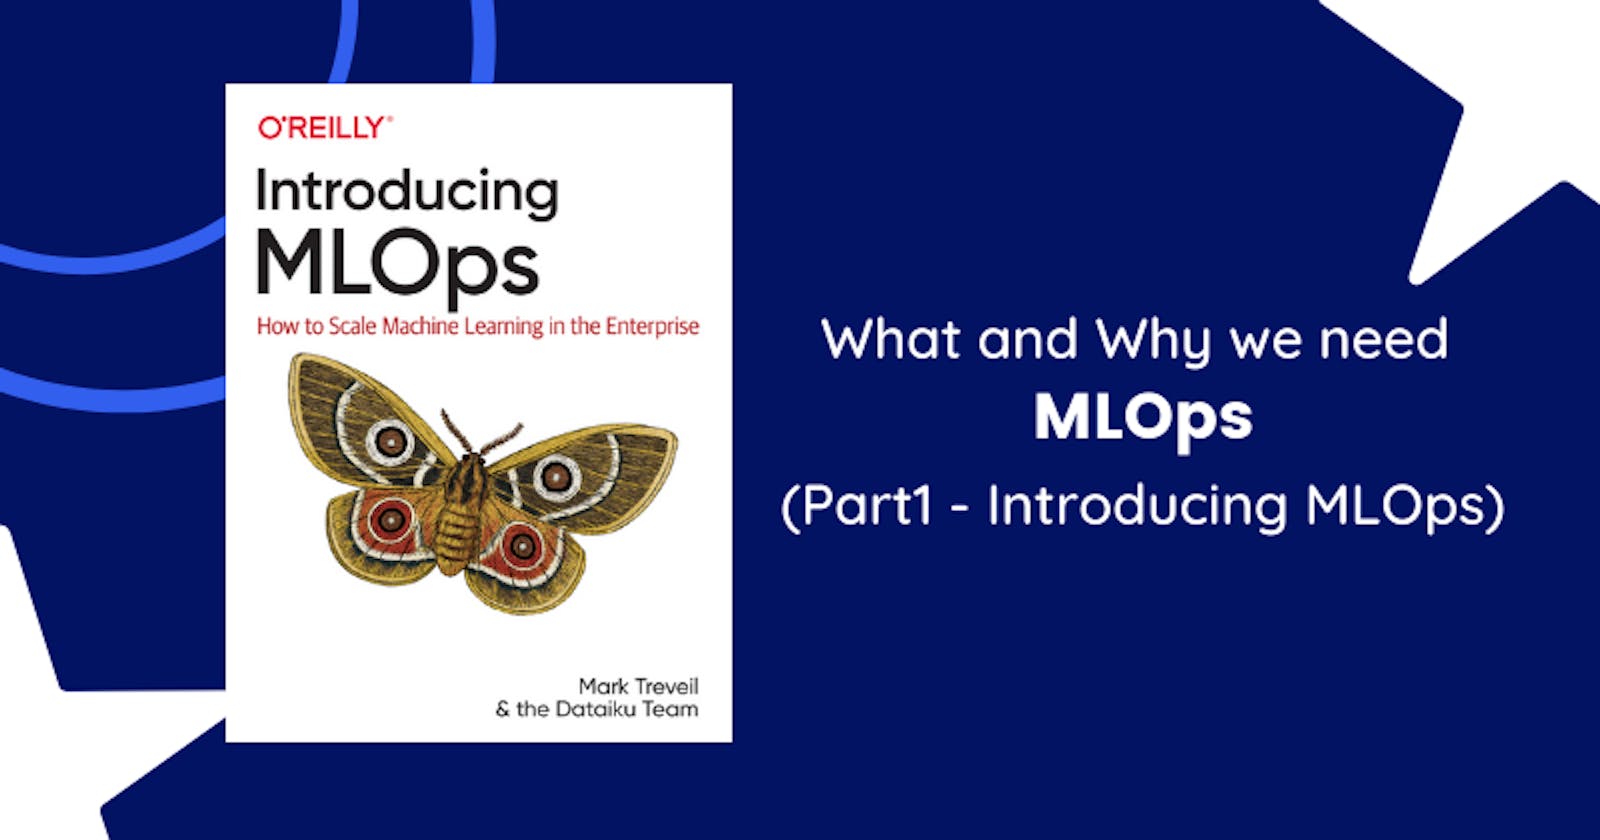 What and Why do we need MLOps? 
(Part 1 - Introducing MLOps)